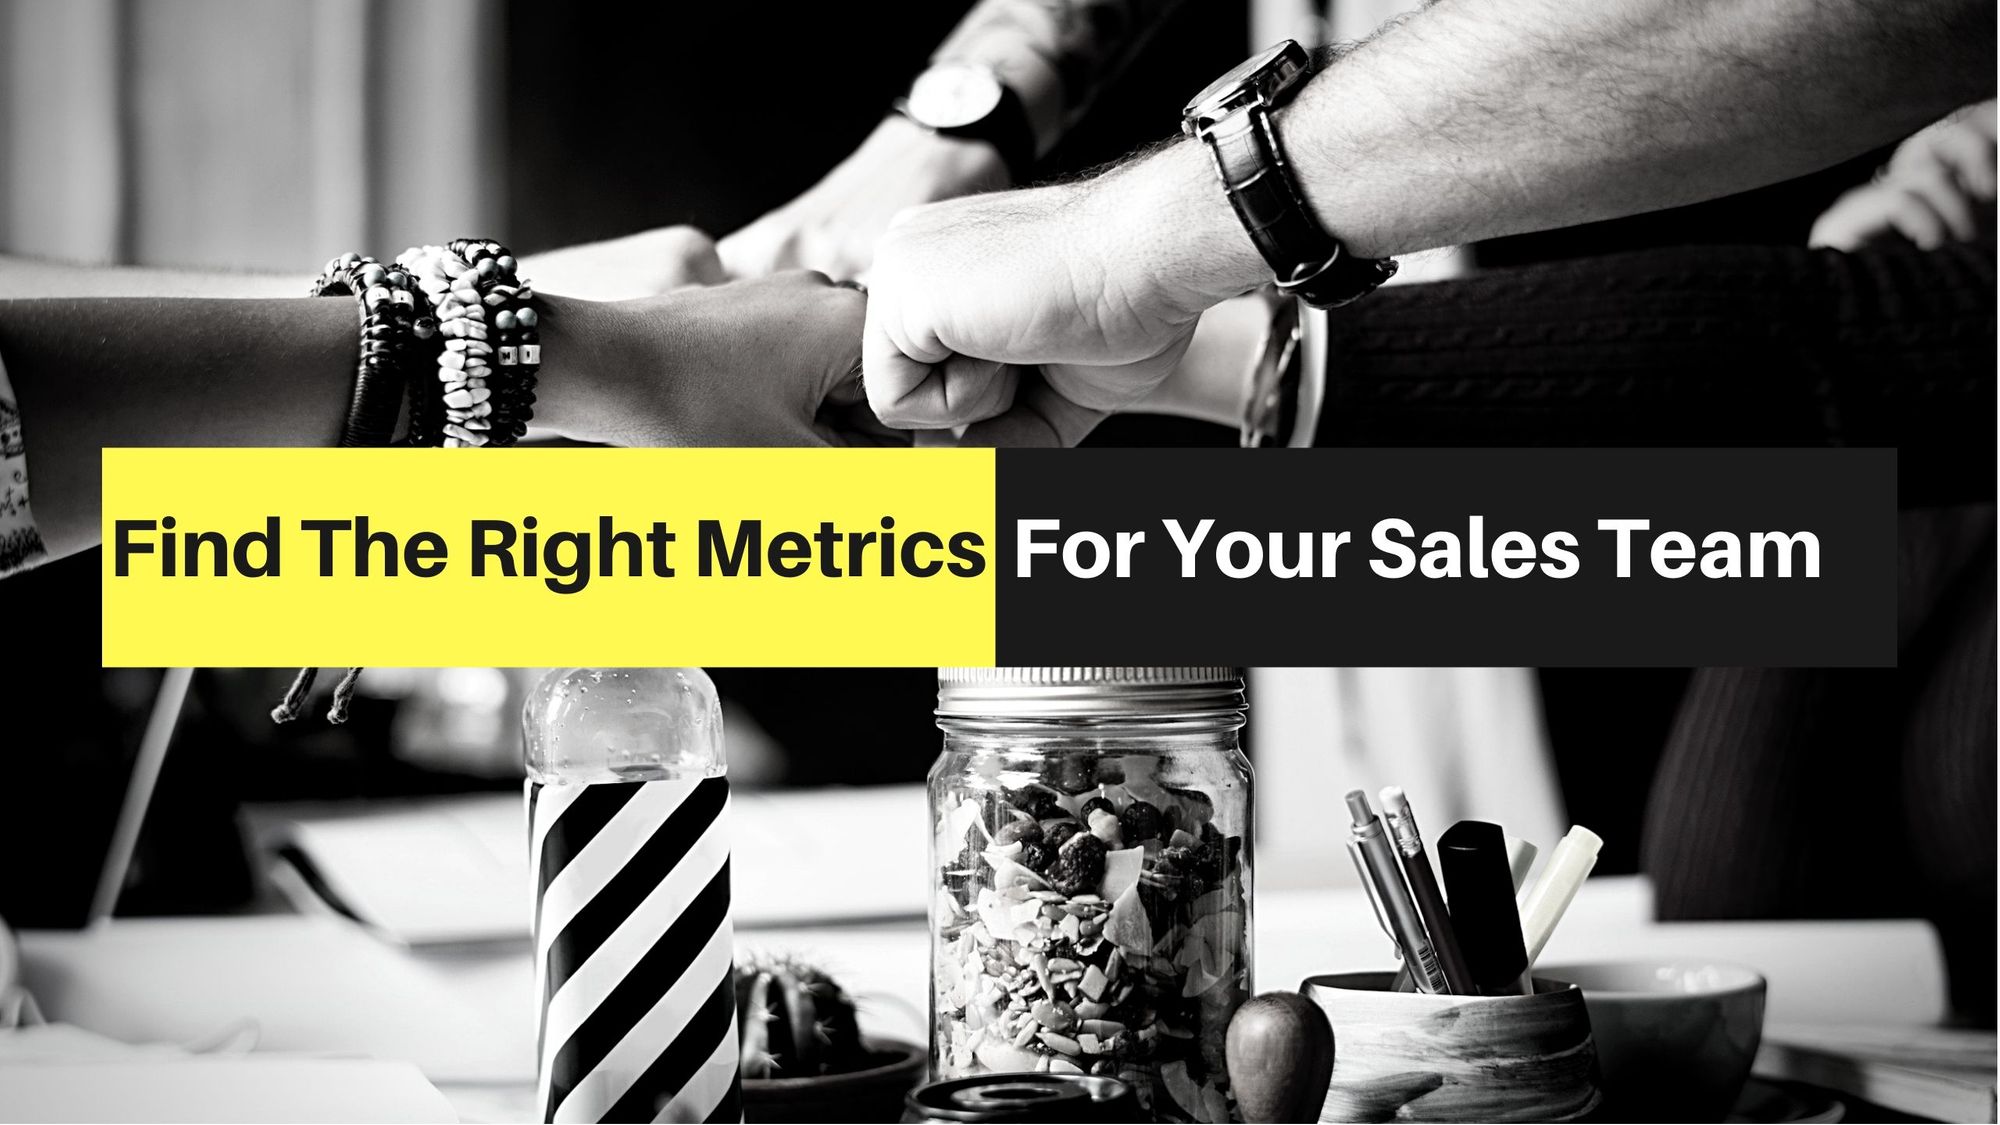 Find the Right Metrics for Your Sales Team